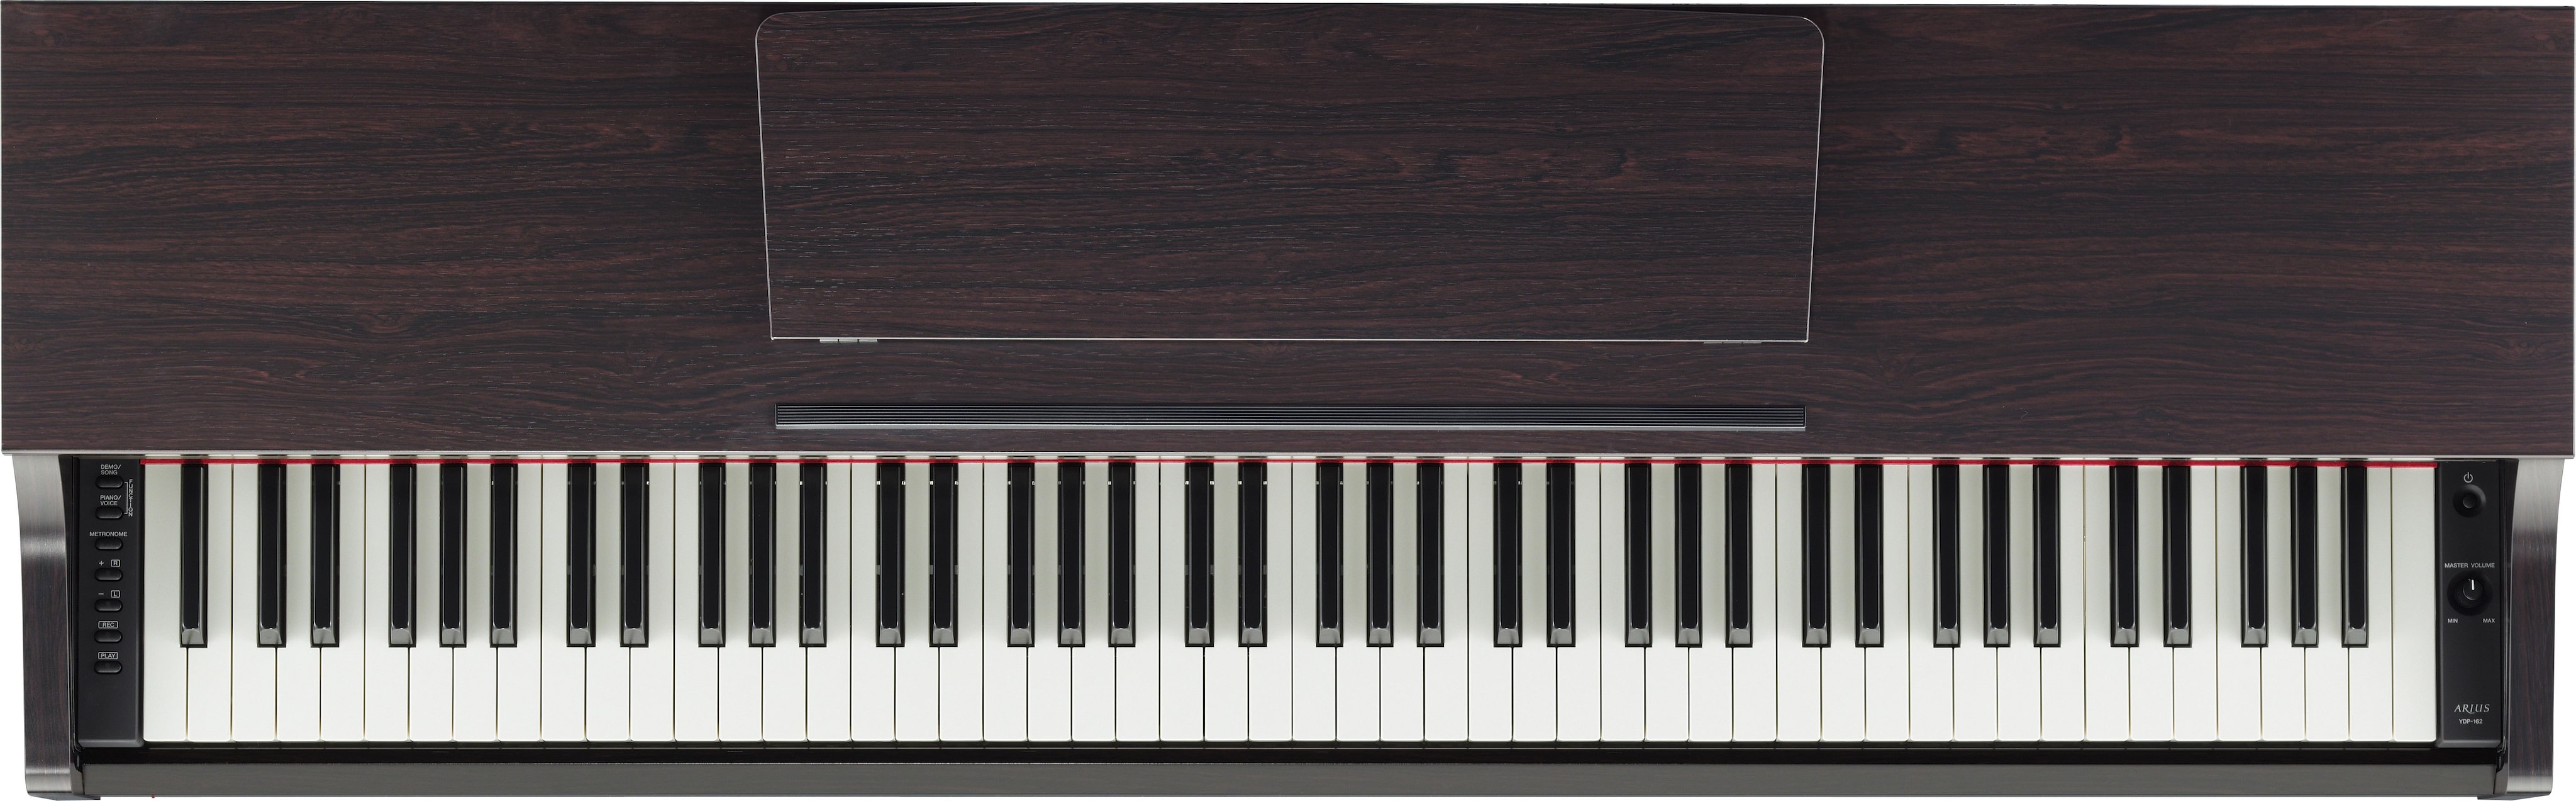 YDP-162 - Overview - ARIUS - Pianos - Musical Instruments - Products -  Yamaha - United States